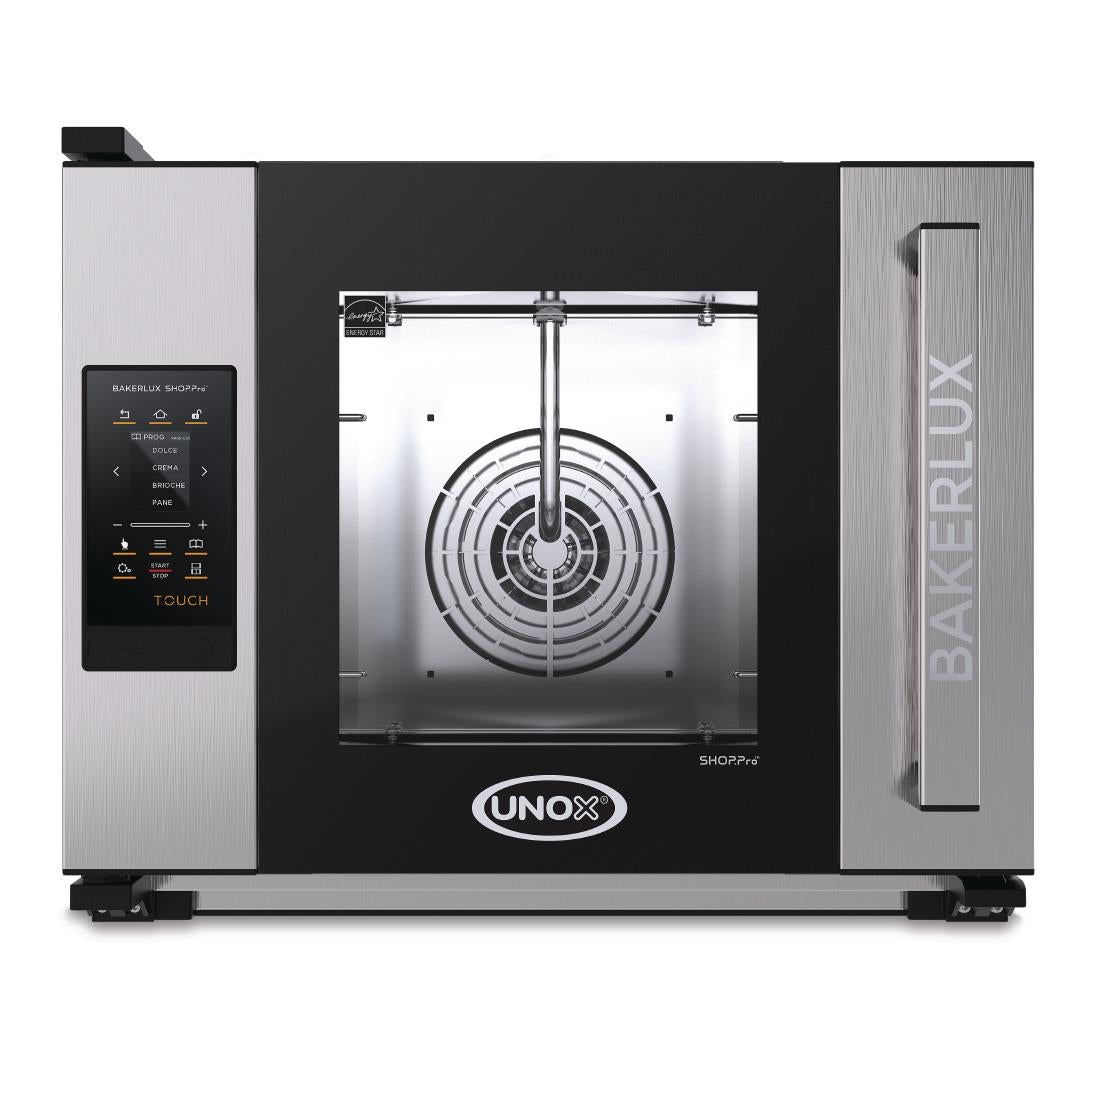 DW078 Unox Bakerlux SHOP Pro Arianna Matic Touch 4 Grid Convection Oven